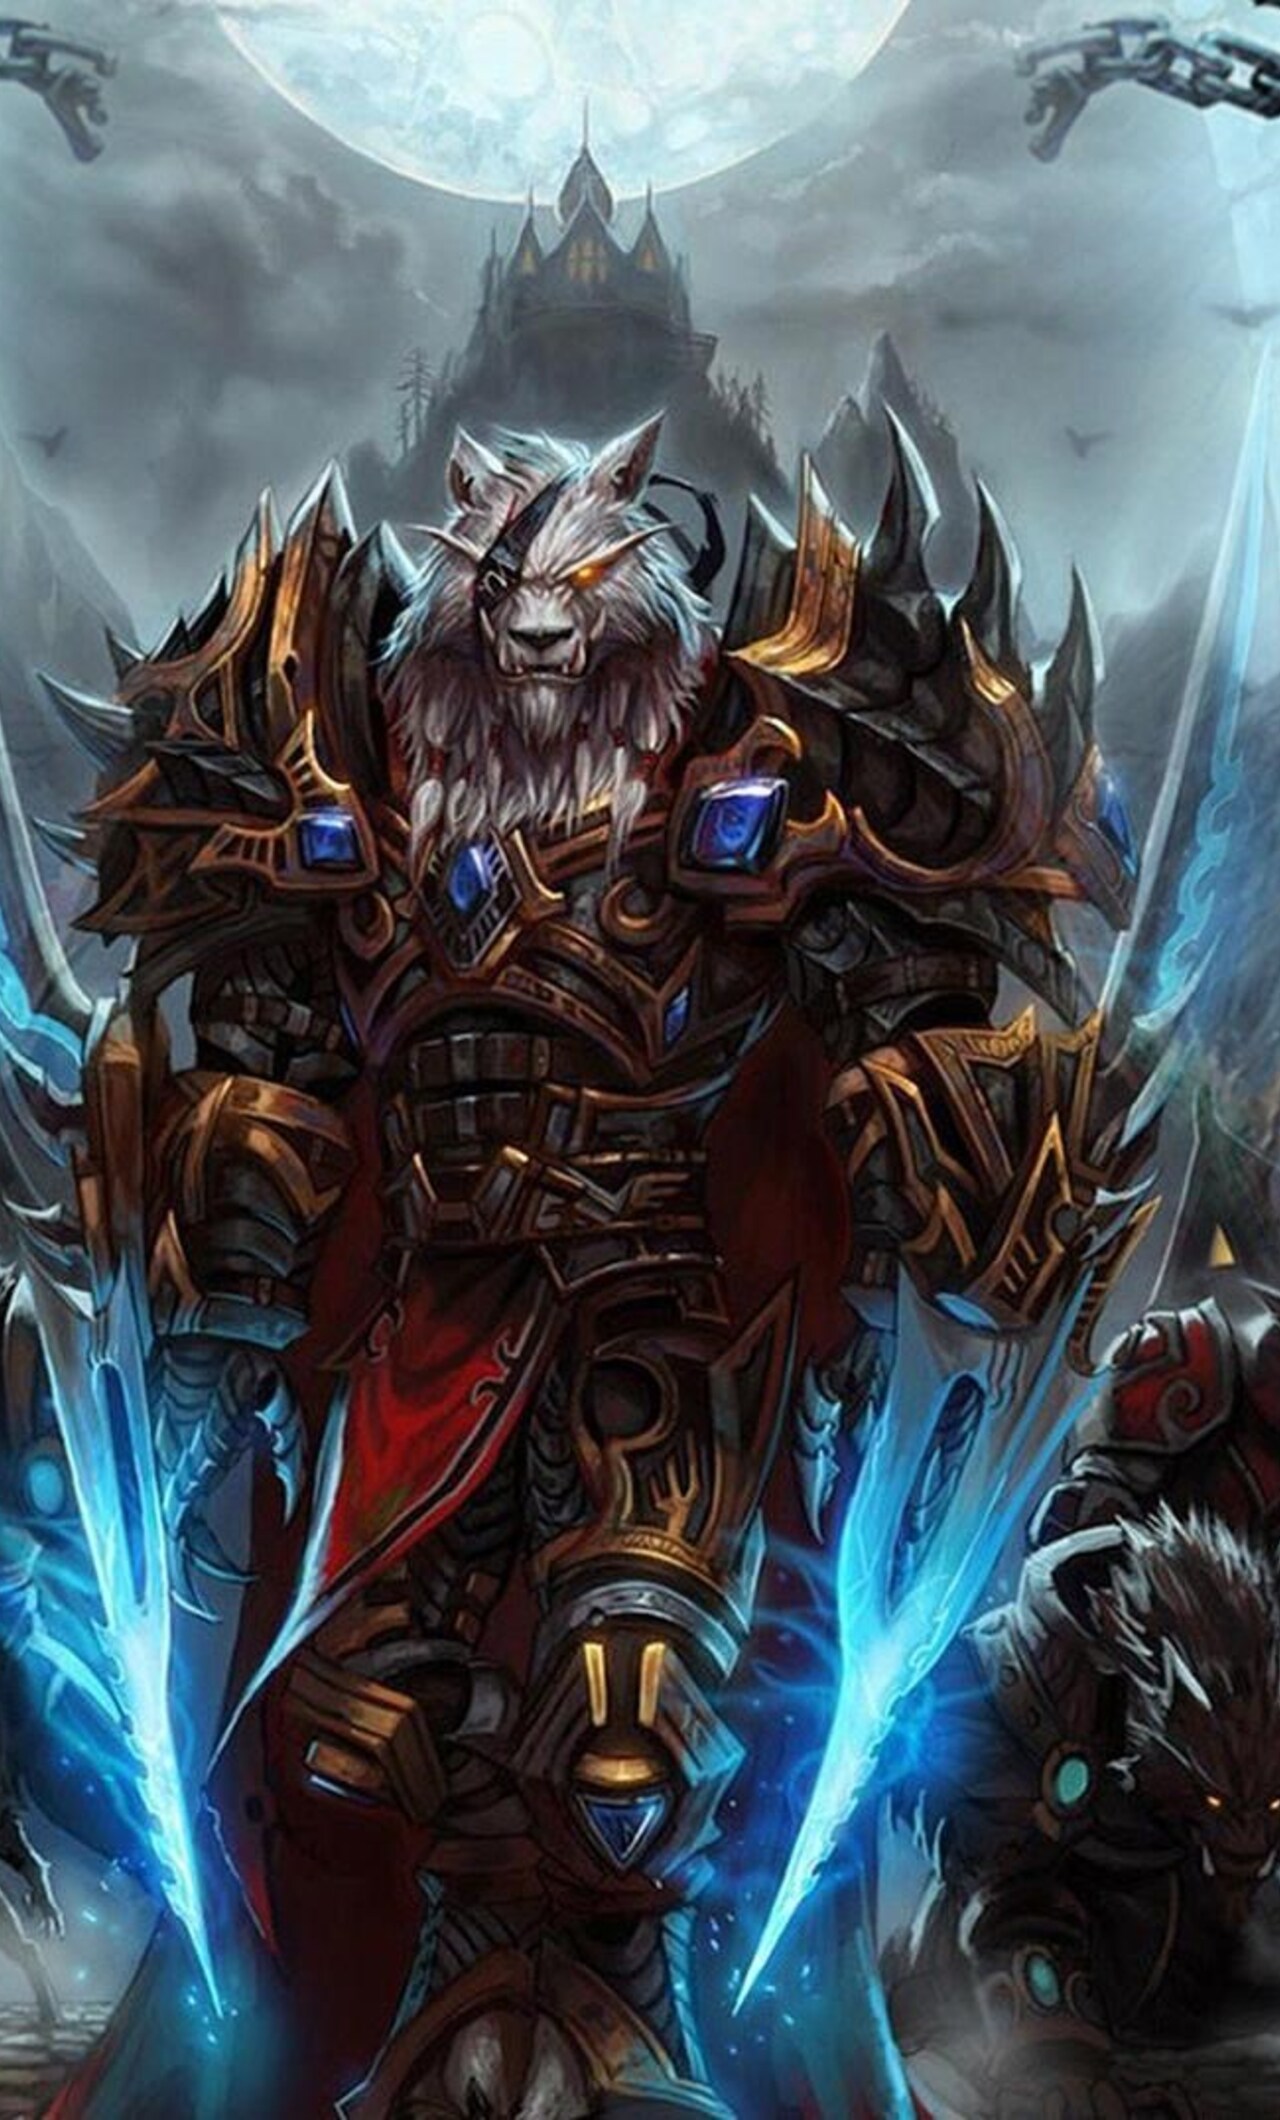 world of warcraft iphone wallpaper,cg artwork,action adventure game,fictional character,warlord,demon